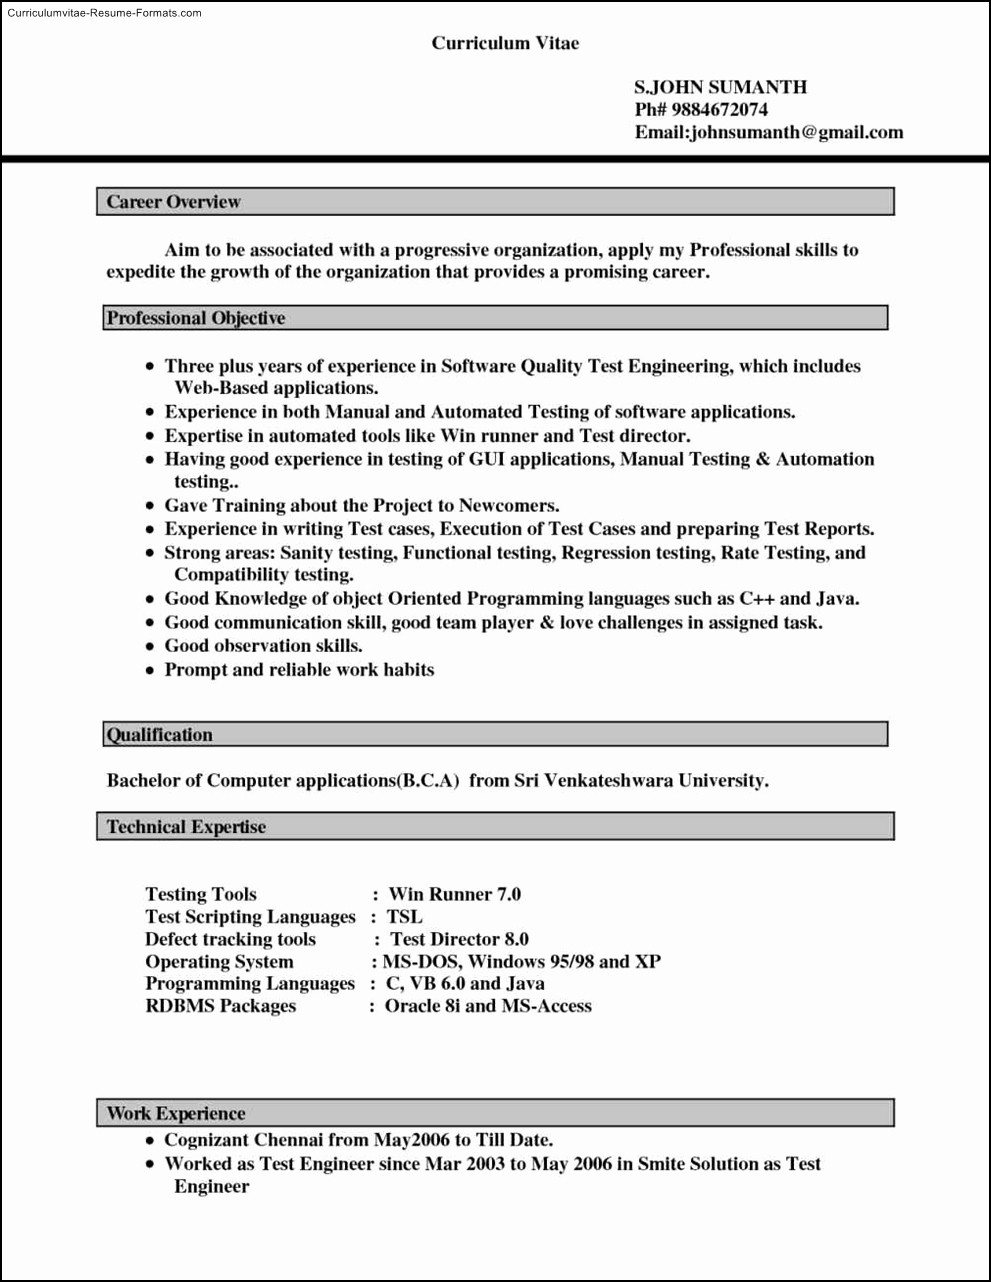 Ms Office Word Resume Templates Unique Free Resume Templates for Microsoft Word 2007 Free